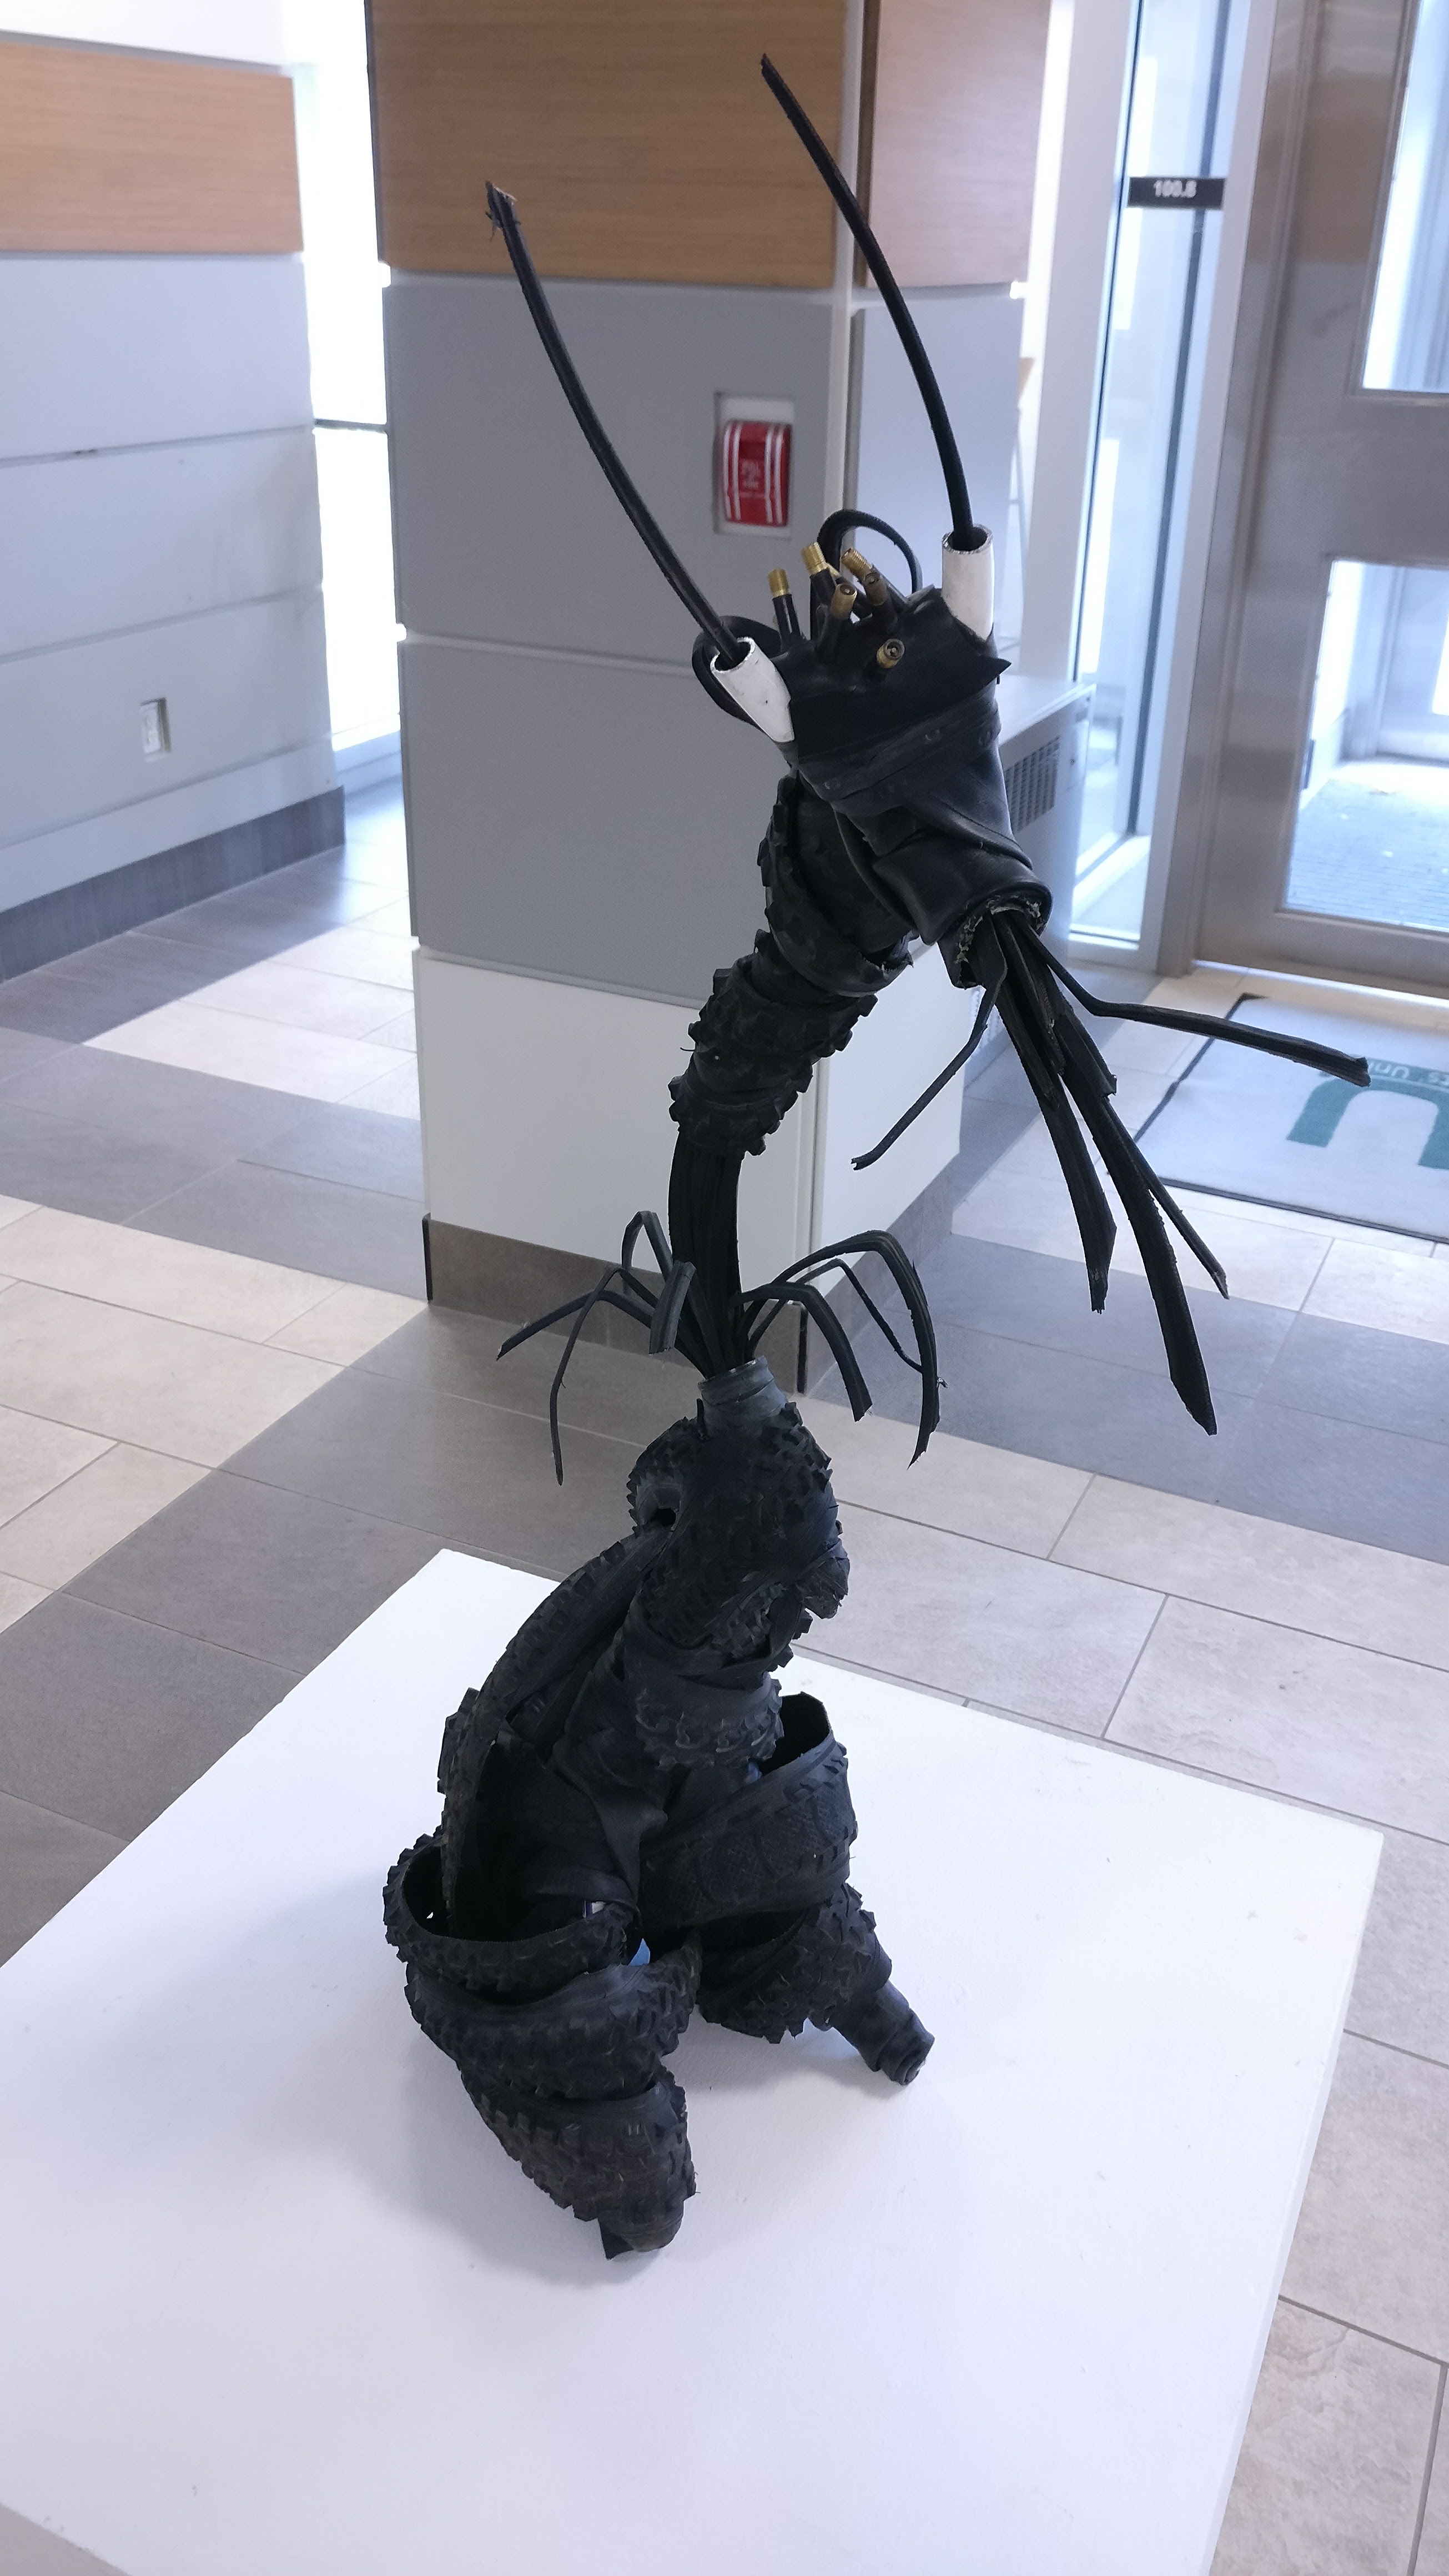 An anthropomorphic creature sculpture made from bike tires and cables by Hailey Jones for ART*Cycled 2017.